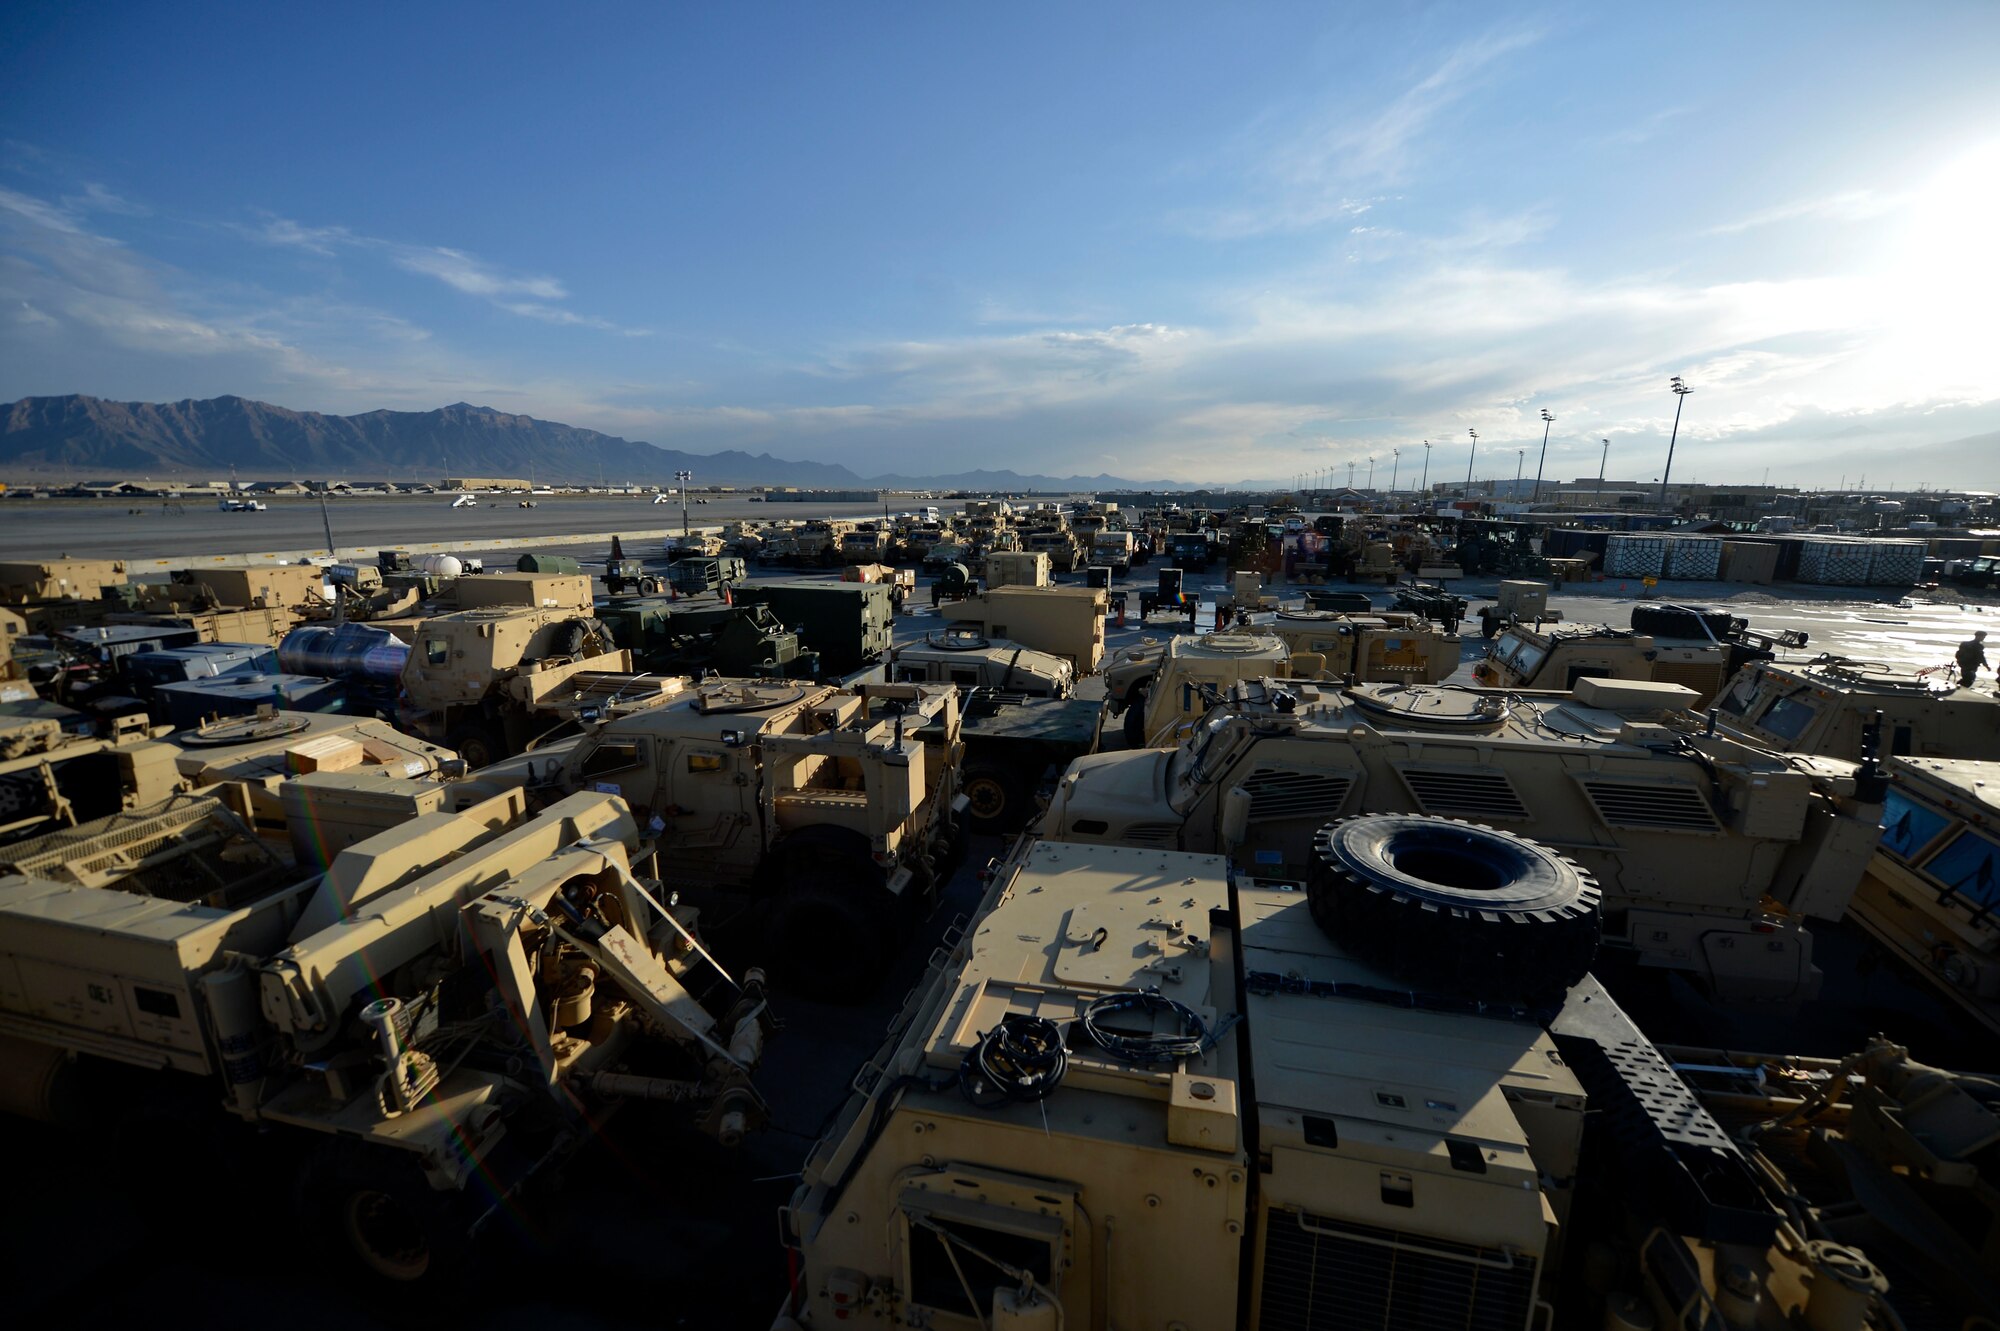 Military vehicles are lined up in the Expeditionary Aerial Port Squadron loading yard at Bagram Airfield, Afghanistan Oct. 23, 2014.  The 455 EAPS coordinates all equipment, personnel and life-saving supply movement that come into Afghanistan via the airfield.  They are the busiest aerial port squadron in the Department of Defense.  (U.S. Air Force photo by Staff Sgt. Evelyn Chavez/Released)